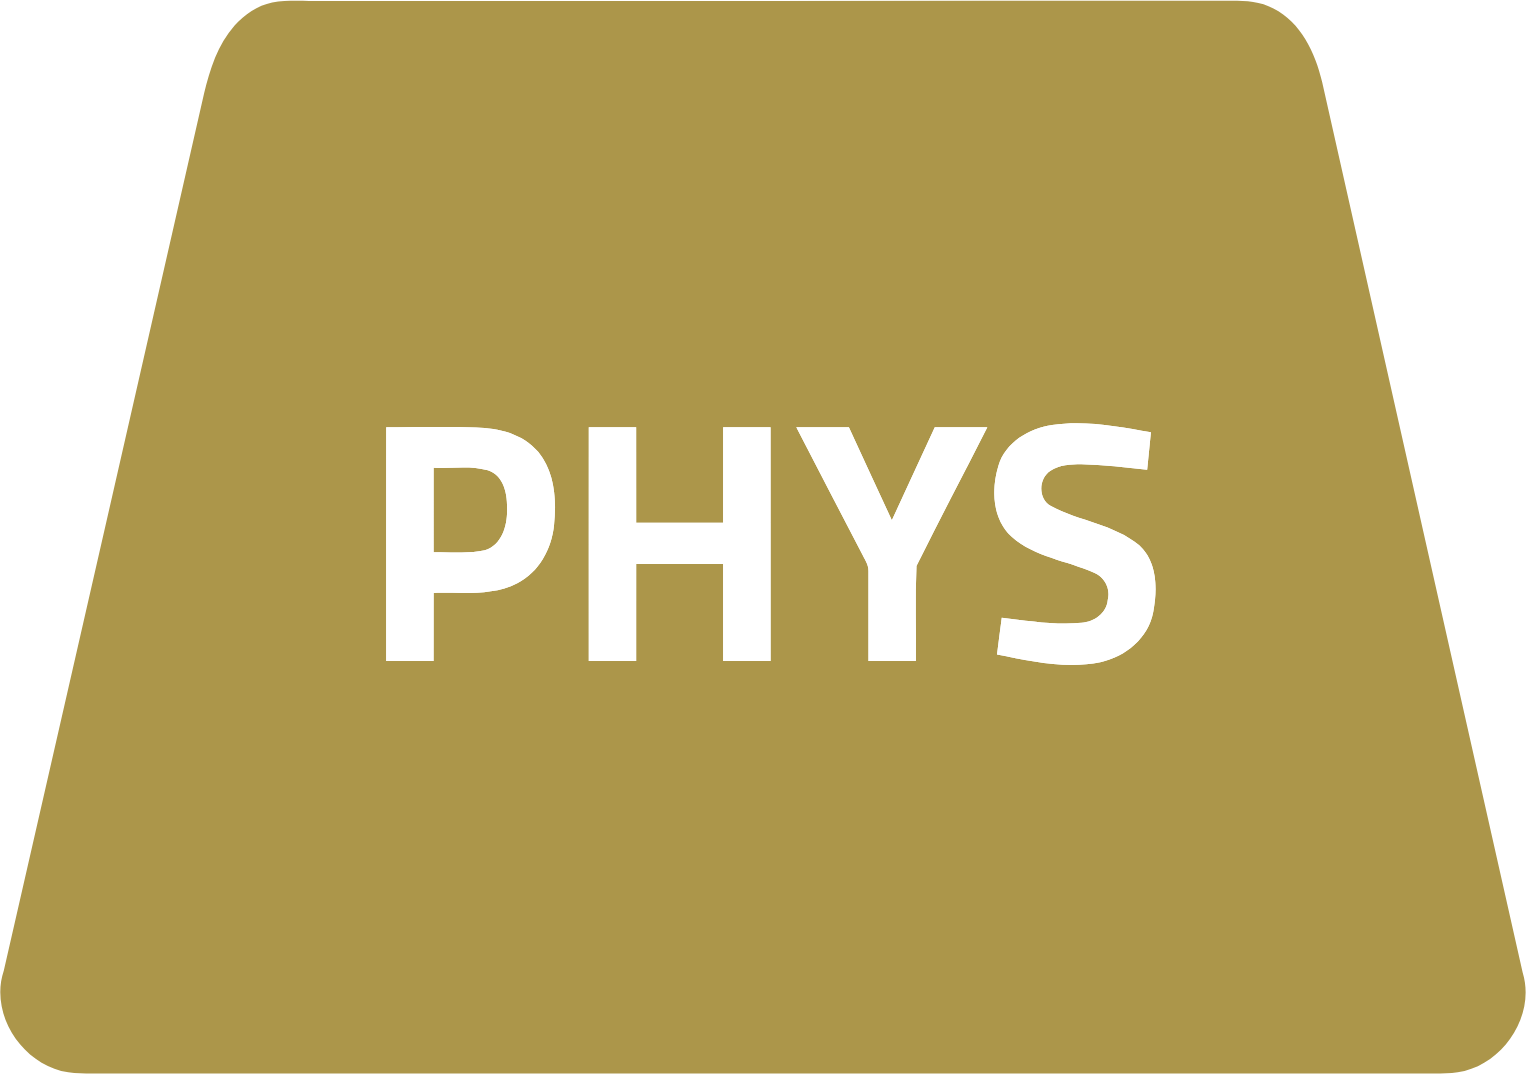 Sprott Physical Gold Trust (PHYS) logo (transparent PNG)